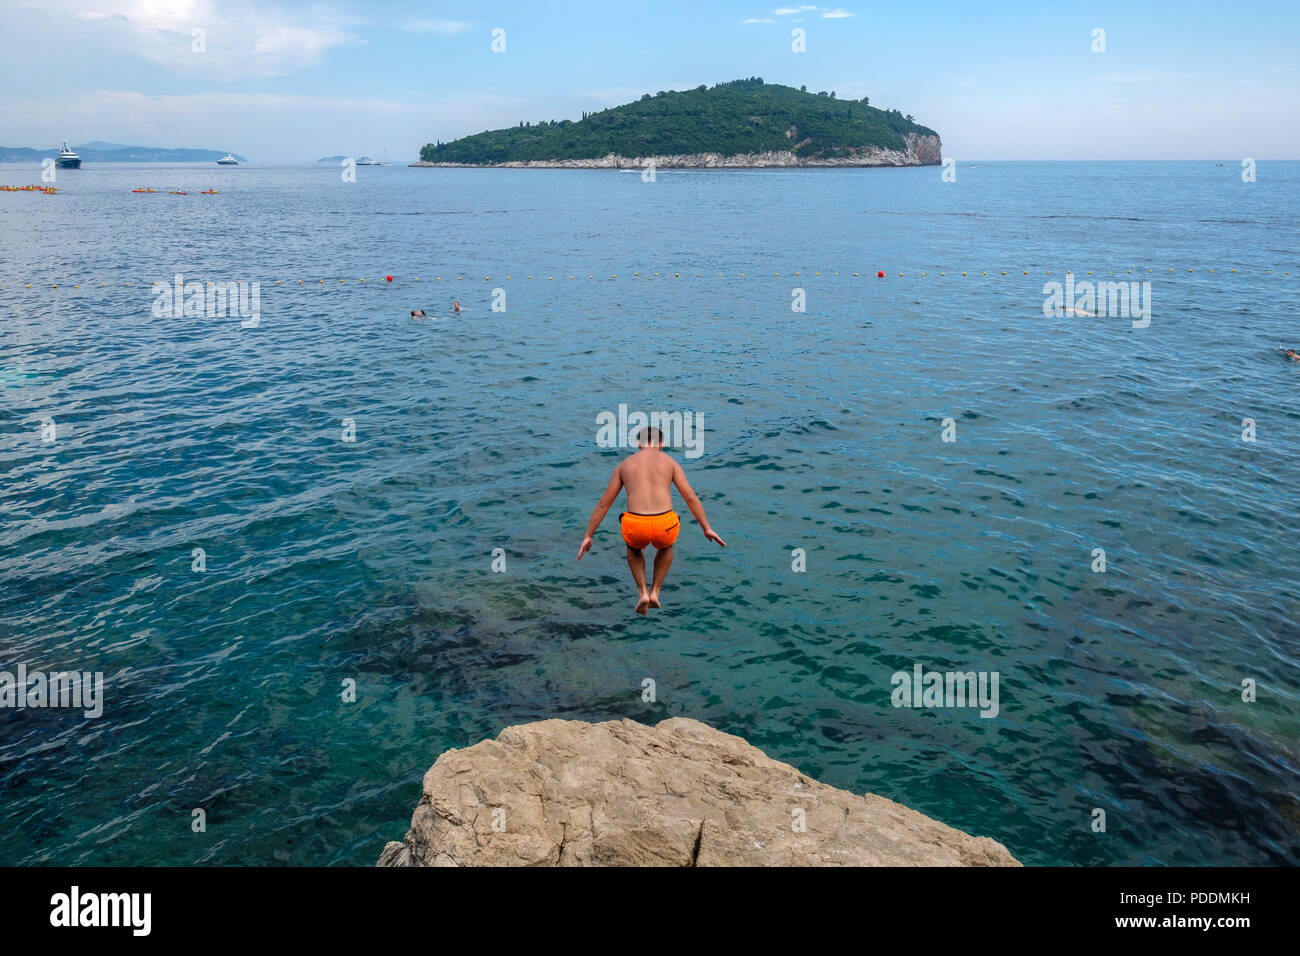 People jumping off a cliff to the Adriatic sea in front of the Lokrum island in Dubrovnik, Croatia, Europe Stock Photo